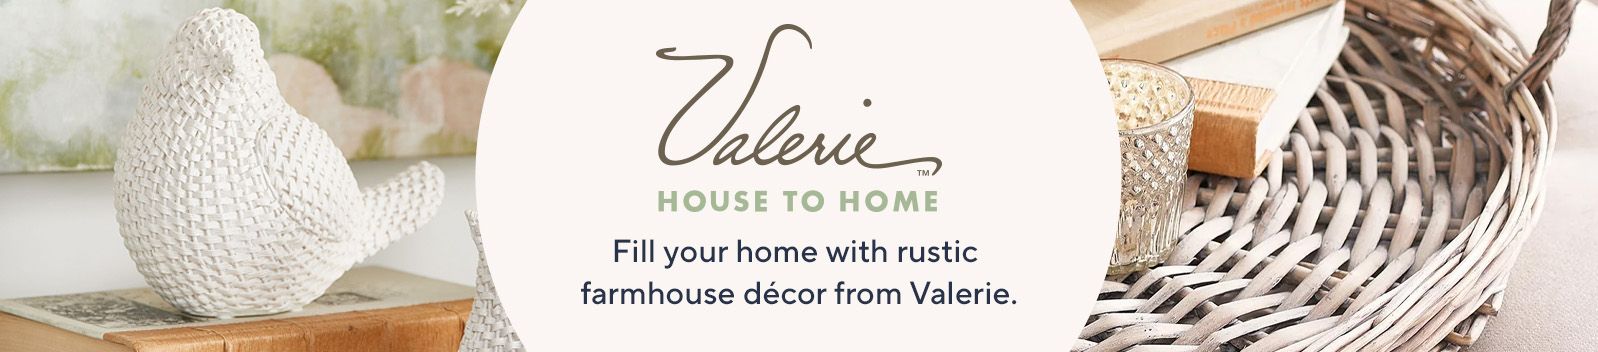 Valerie House to Home. Fill your home with rustic farmhouse décor from Valerie. 